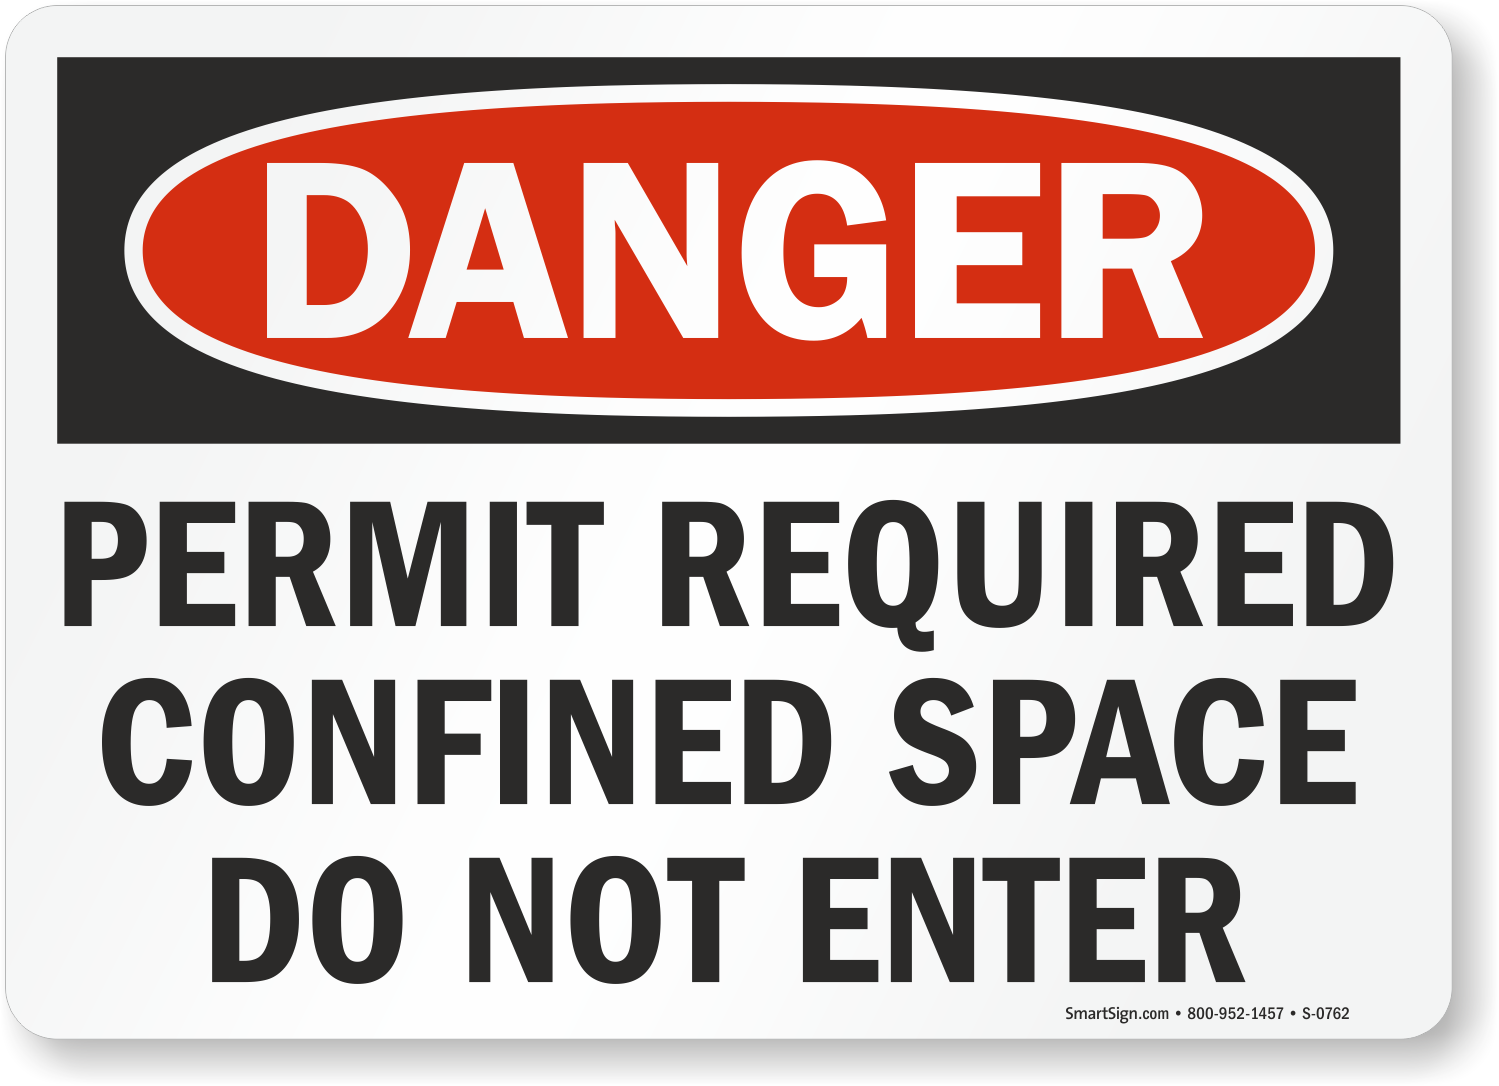 osha-danger-permit-required-confined-space-do-not-enter-sign